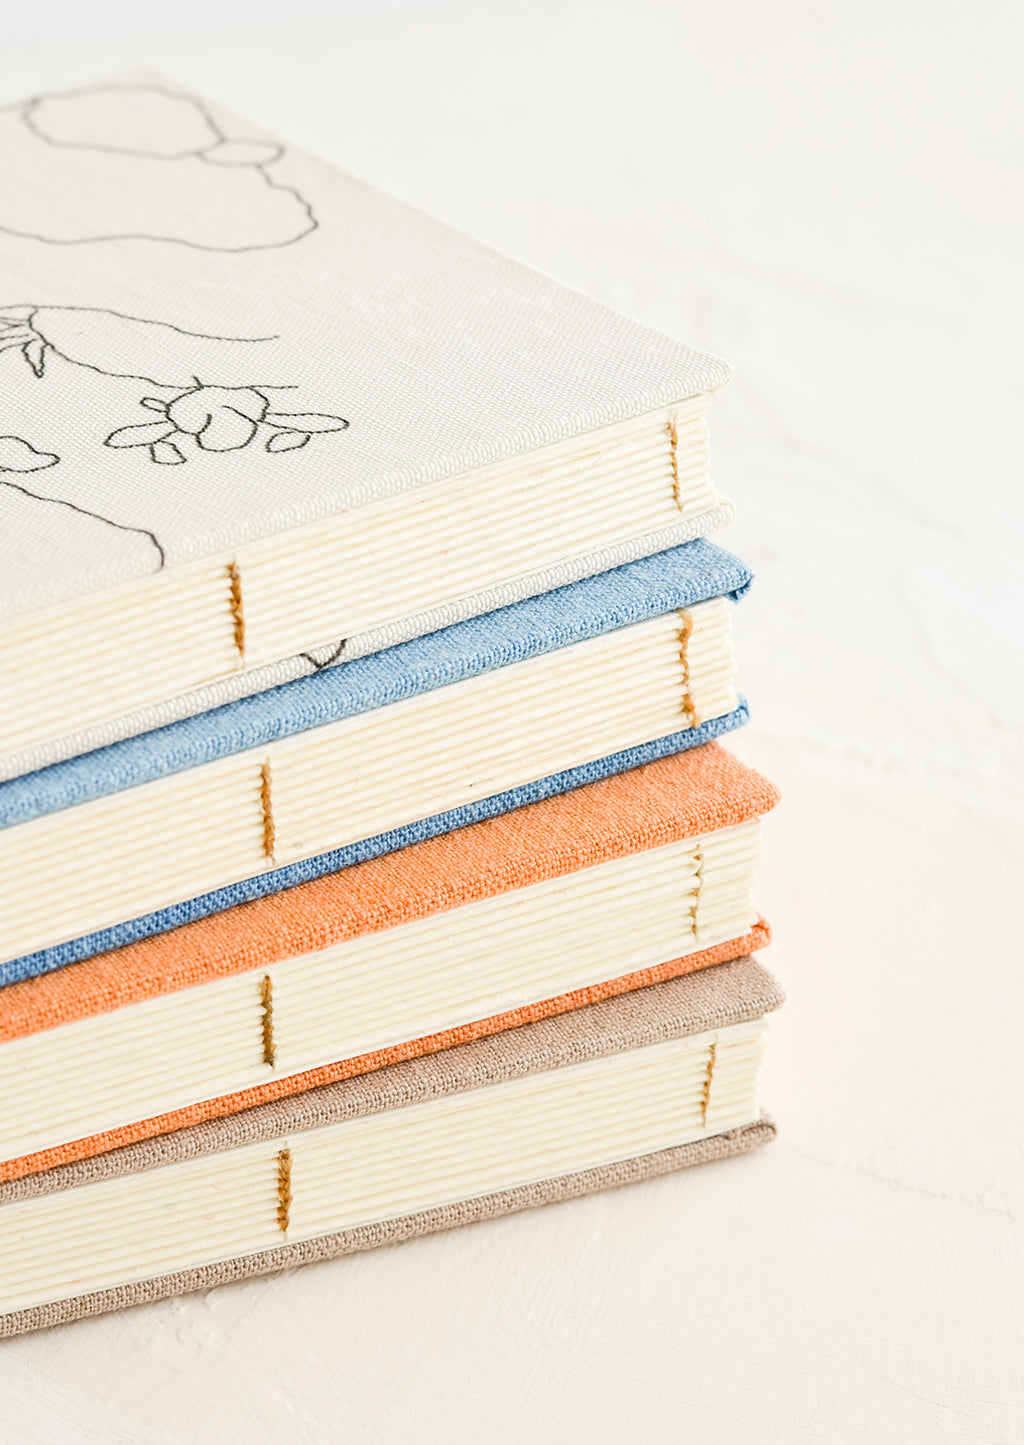 5: A stack of cloth journals with hand-bound seams.